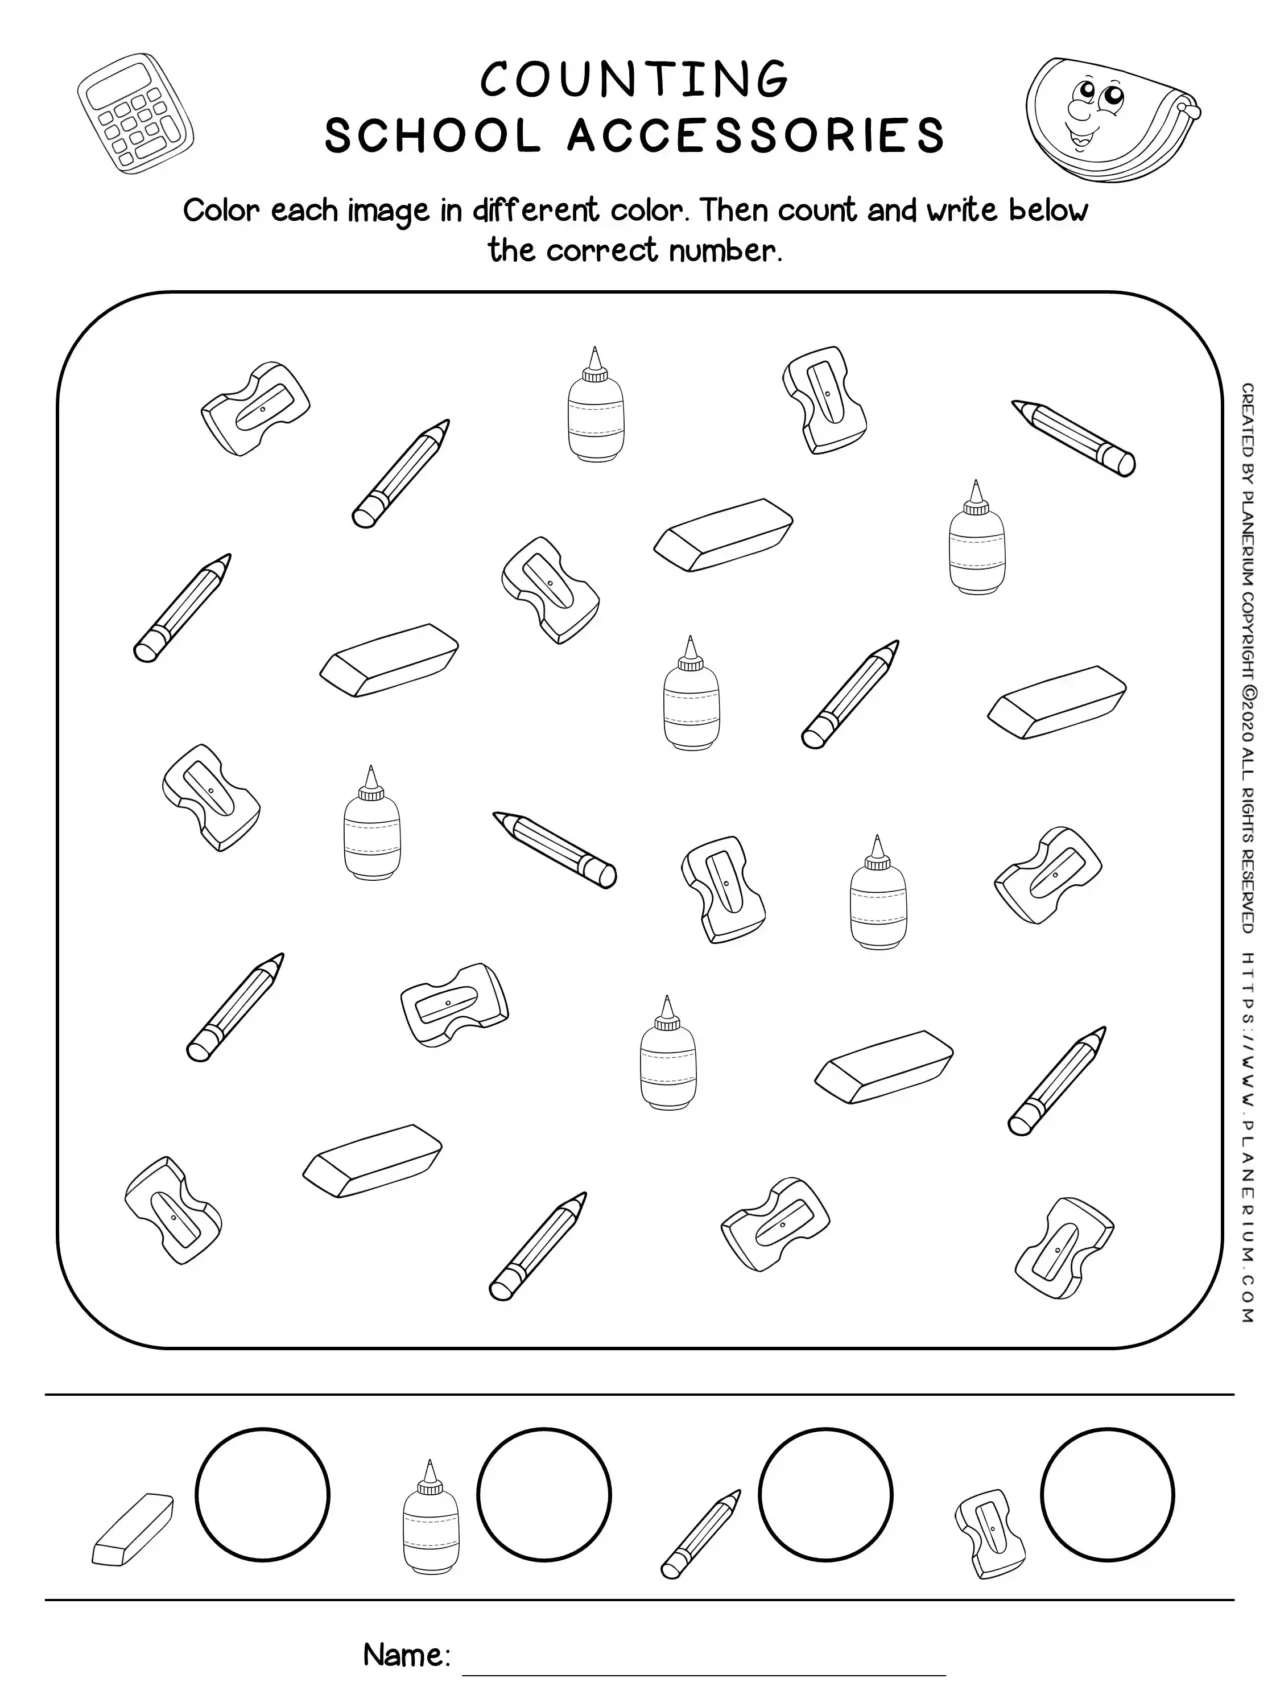 Back to
School - Worksheet - Counting School accessories